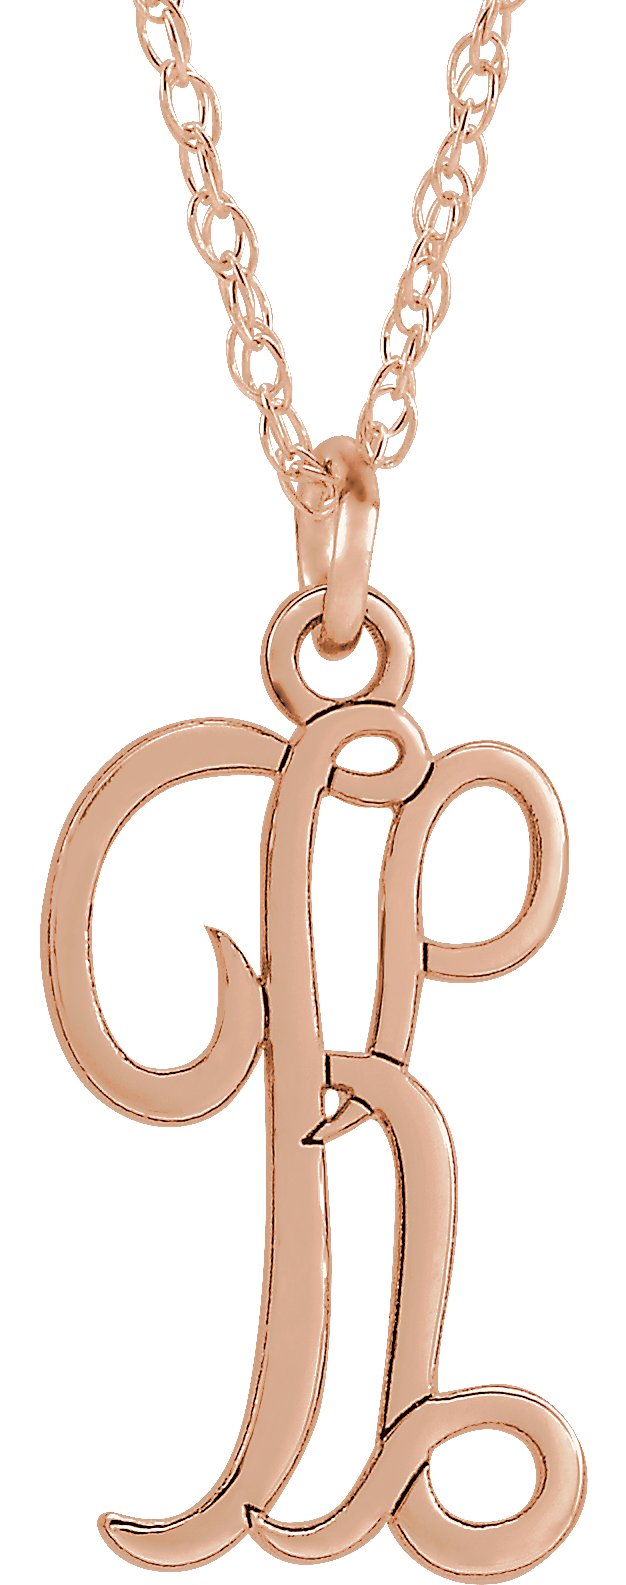 14K Rose Gold-Plated Sterling Silver Script Initial K 16-18" Necklace